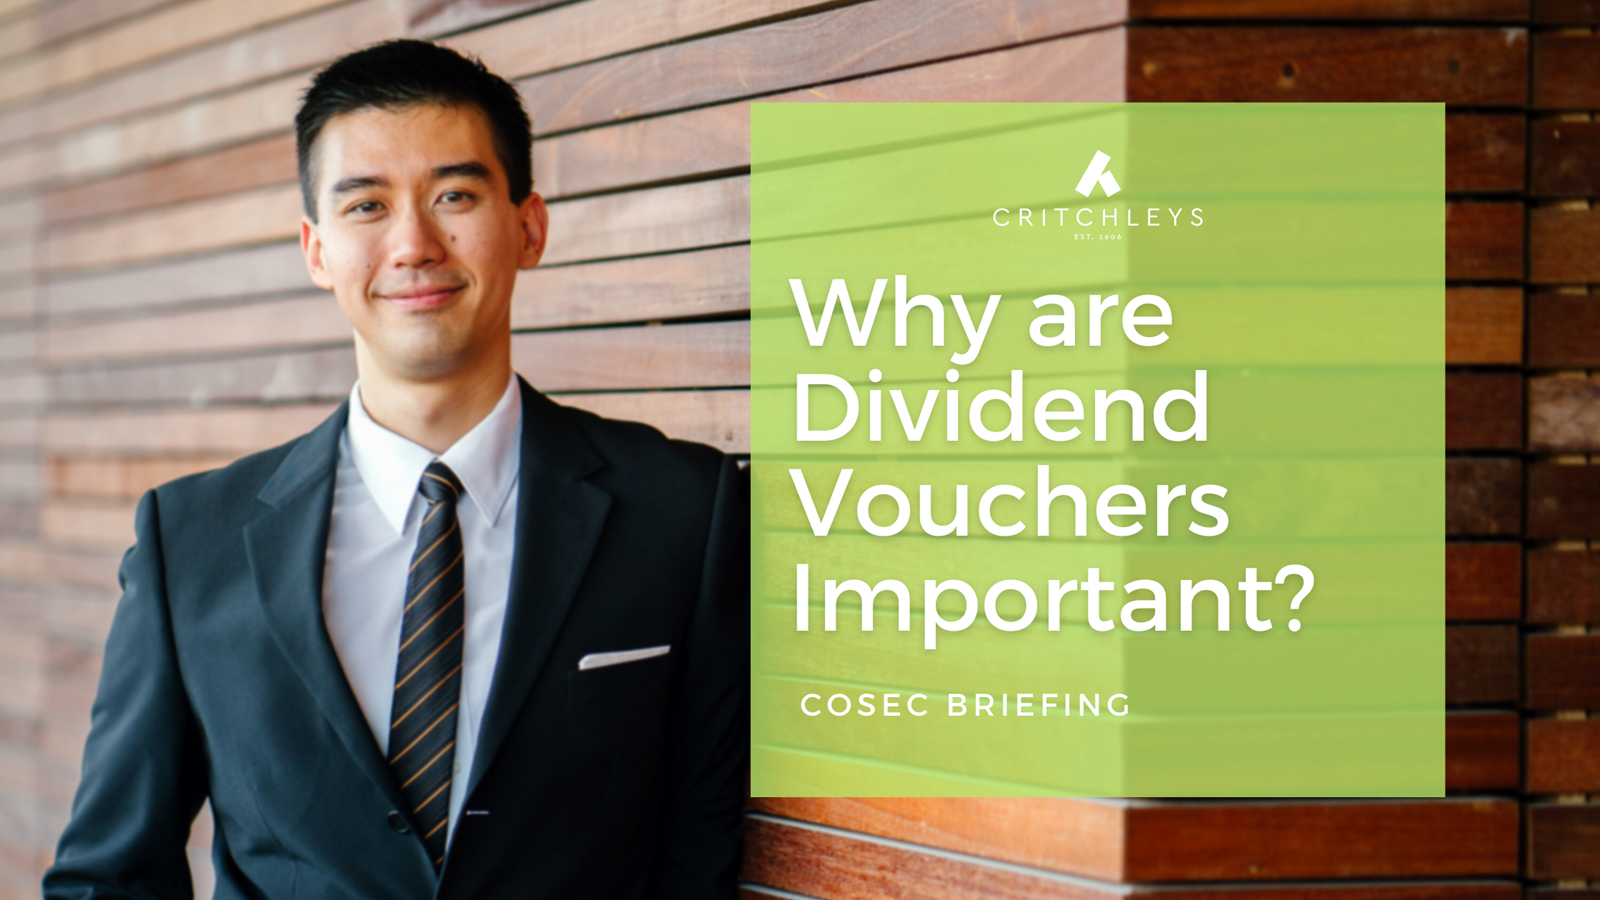 Why are Dividend Vouchers Important?